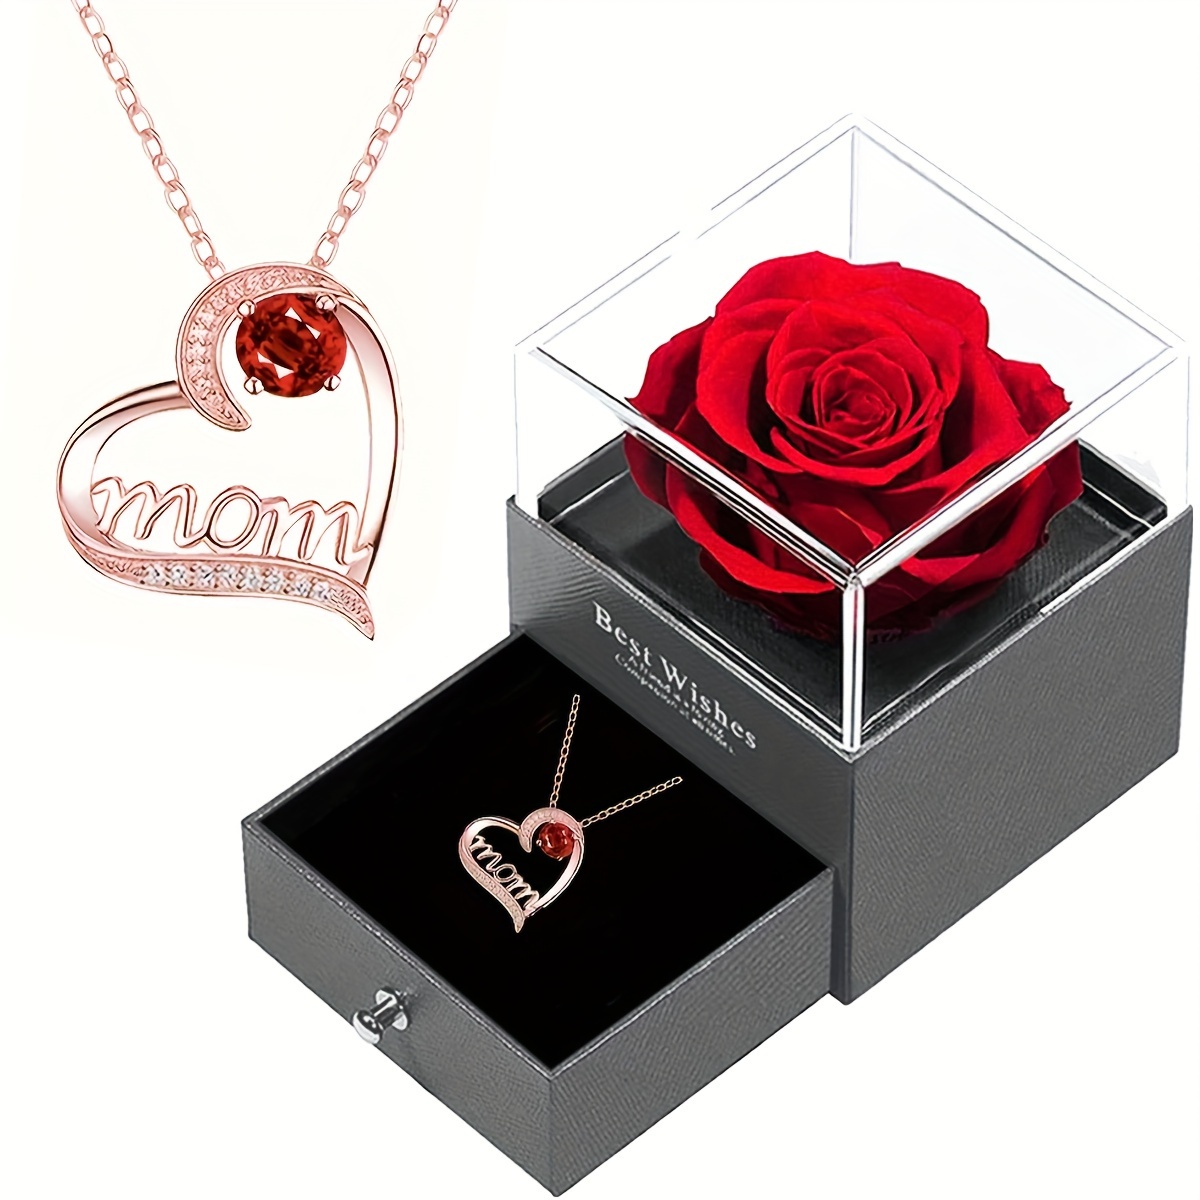 

1pc Fashion Heart Shape Mom Letter Pendant Exquisite Necklace With Red Rose Gift Box, Elegant Versatile Jewelry Romantic Special Mother's Day Gifts For Women